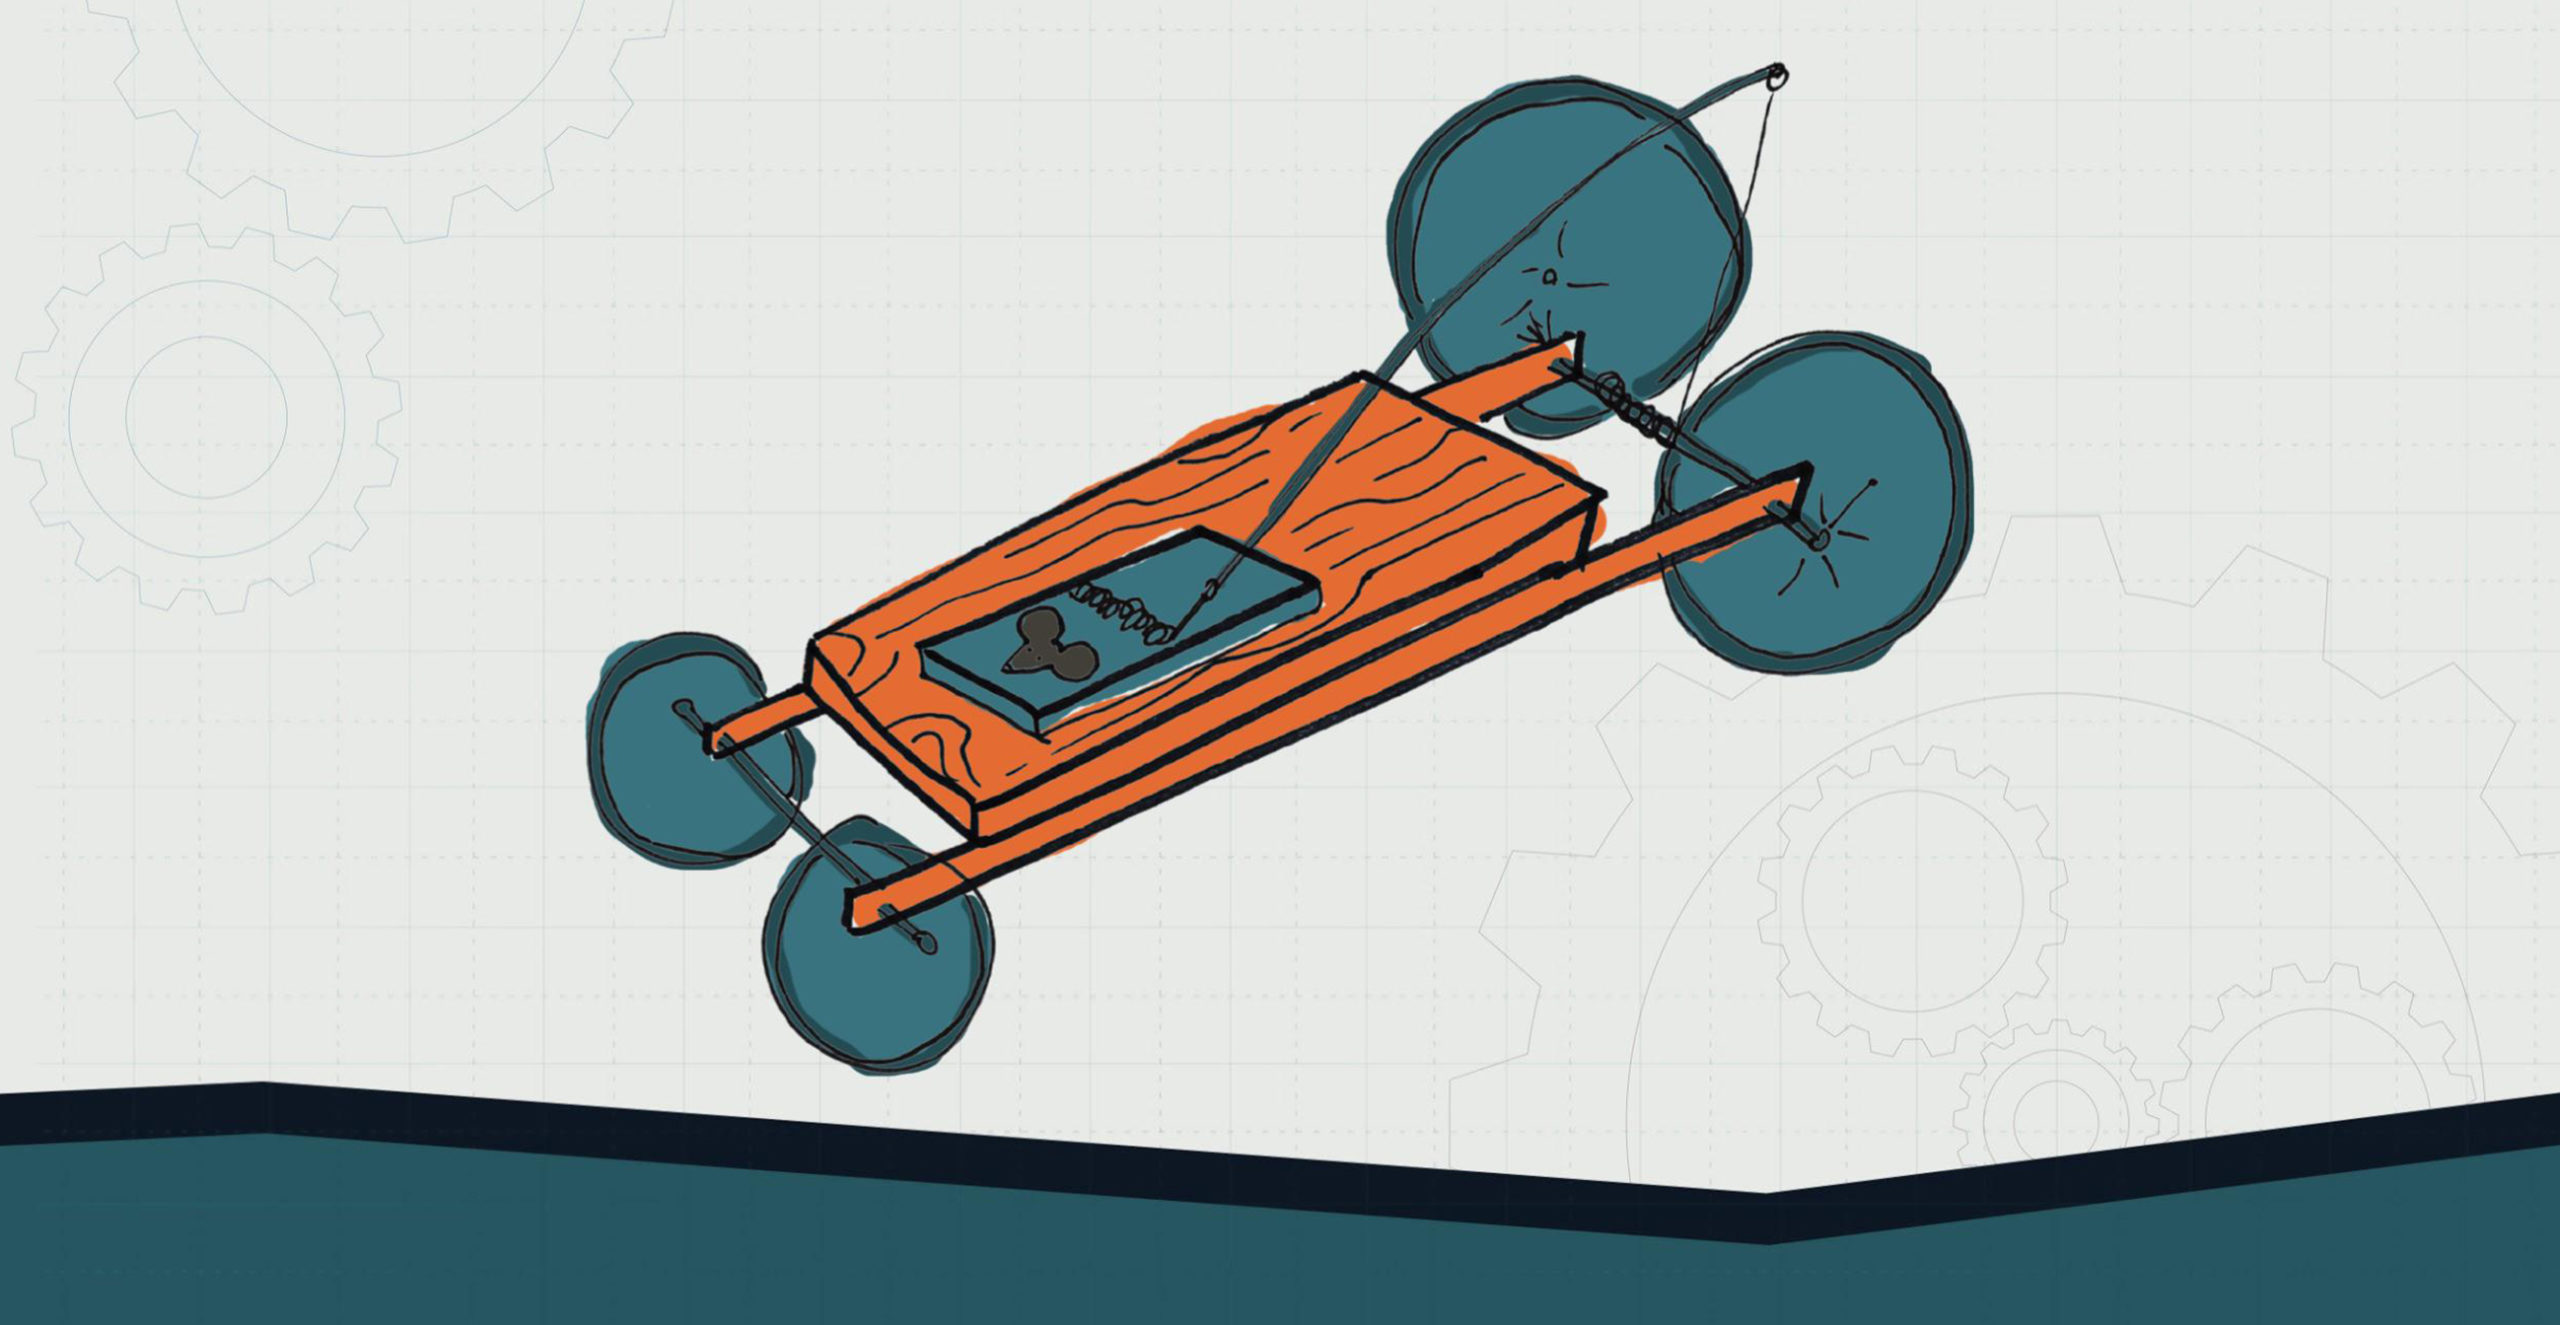 https://www.learner.org/wp-content/uploads/2020/05/two-bit-circus-project-playbook-educator-edition-project-39-mousetrap-car-1-scaled.jpg